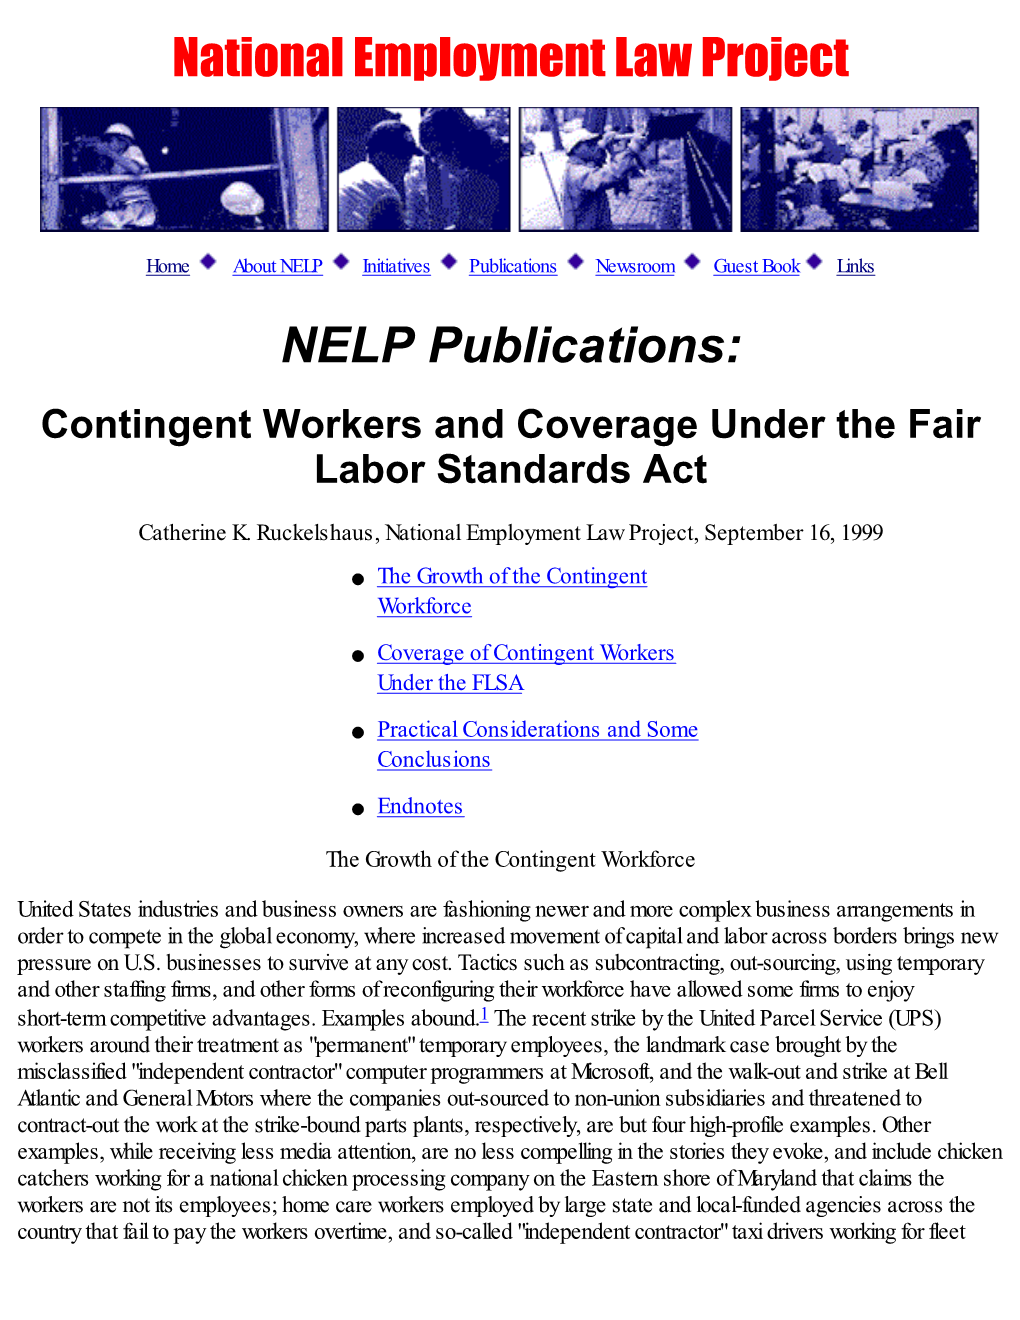 Contingent Workers and Coverage Under the Fair Labor Standards Act